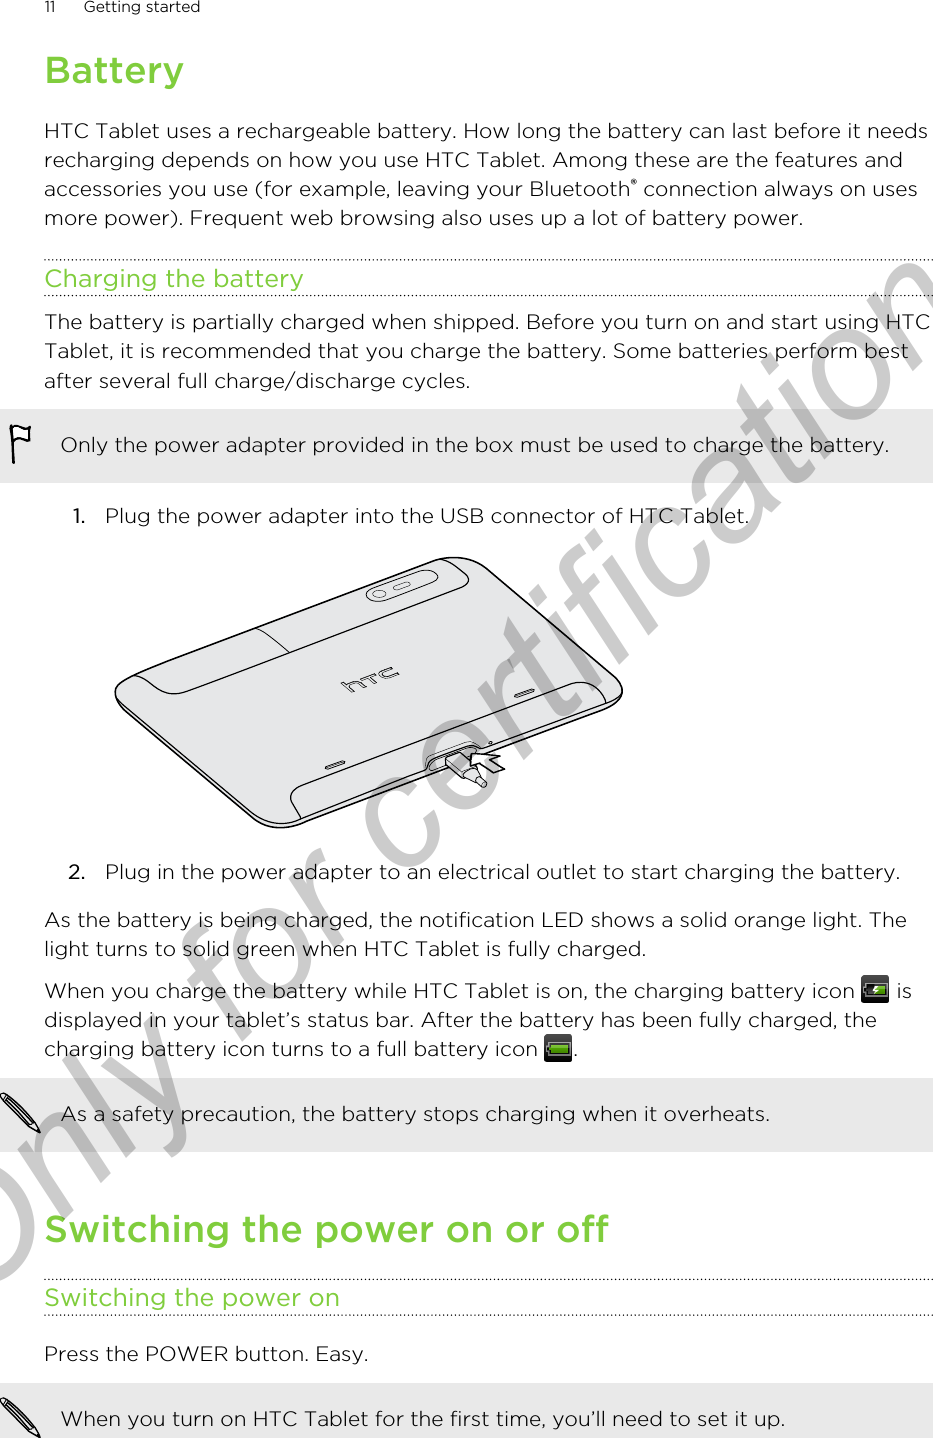 BatteryHTC Tablet uses a rechargeable battery. How long the battery can last before it needsrecharging depends on how you use HTC Tablet. Among these are the features andaccessories you use (for example, leaving your Bluetooth® connection always on usesmore power). Frequent web browsing also uses up a lot of battery power.Charging the batteryThe battery is partially charged when shipped. Before you turn on and start using HTCTablet, it is recommended that you charge the battery. Some batteries perform bestafter several full charge/discharge cycles.Only the power adapter provided in the box must be used to charge the battery.1. Plug the power adapter into the USB connector of HTC Tablet. 2. Plug in the power adapter to an electrical outlet to start charging the battery.As the battery is being charged, the notification LED shows a solid orange light. Thelight turns to solid green when HTC Tablet is fully charged.When you charge the battery while HTC Tablet is on, the charging battery icon   isdisplayed in your tablet’s status bar. After the battery has been fully charged, thecharging battery icon turns to a full battery icon  .As a safety precaution, the battery stops charging when it overheats.Switching the power on or offSwitching the power onPress the POWER button. Easy. When you turn on HTC Tablet for the first time, you’ll need to set it up.11 Getting startedOnly for certification